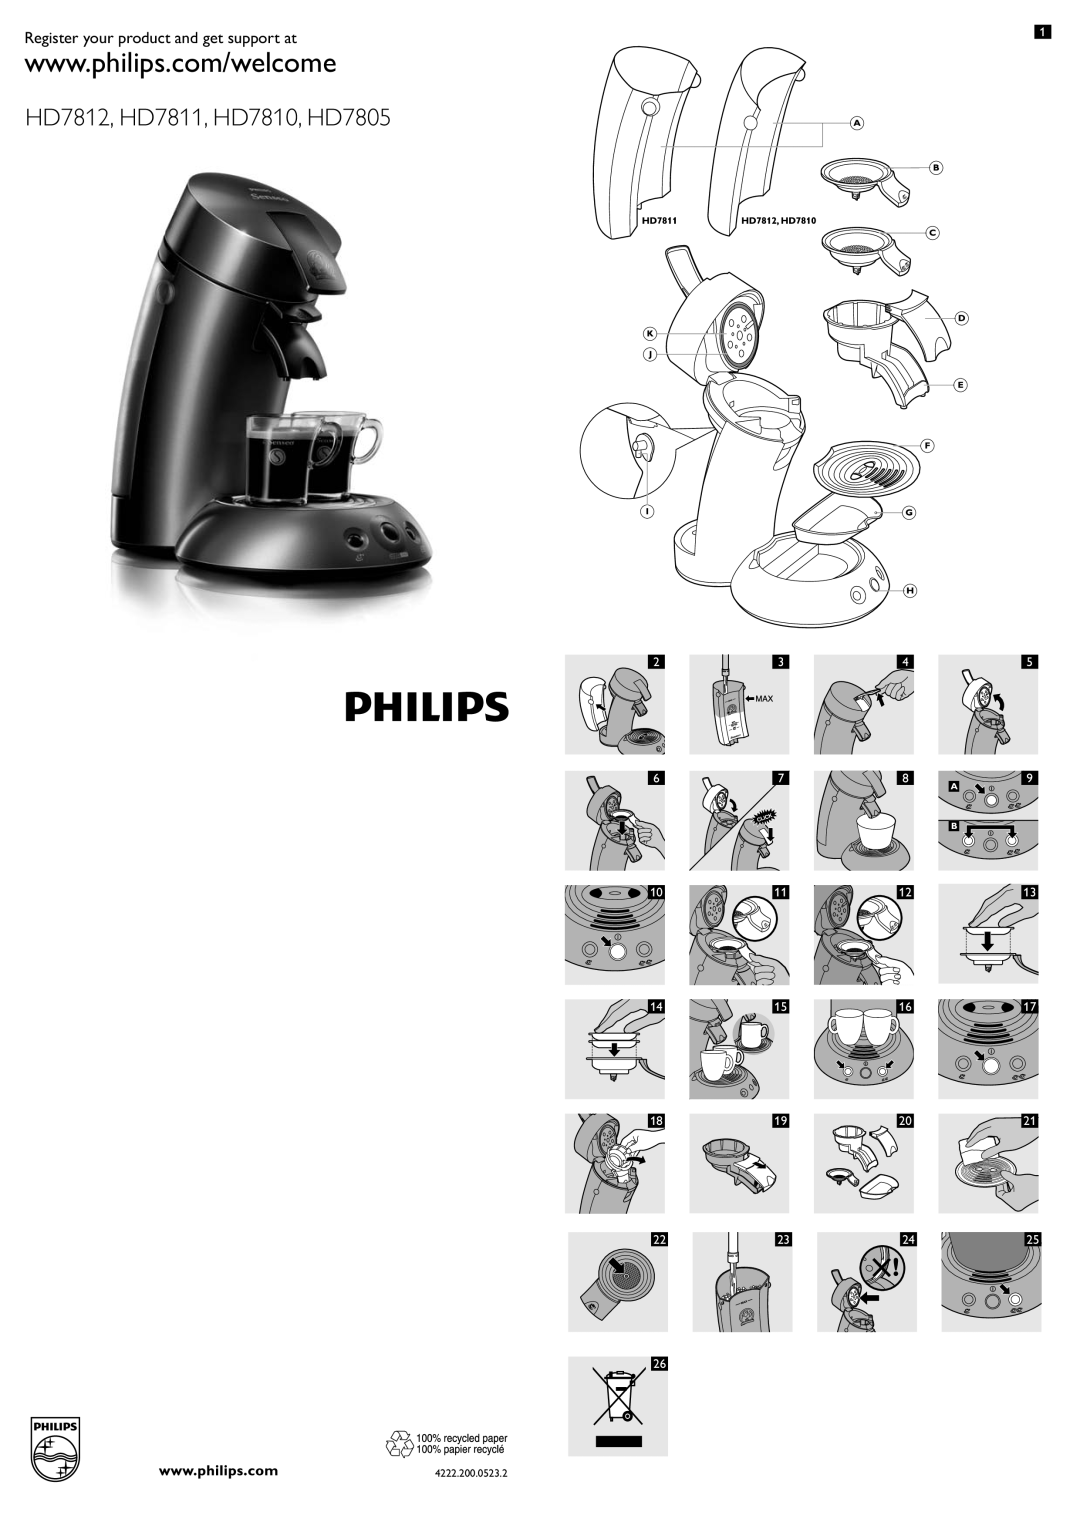 Philips manual HD7812, HD7811, HD7810, HD7805, Register your product and get support at, 4222.200.0523.2 